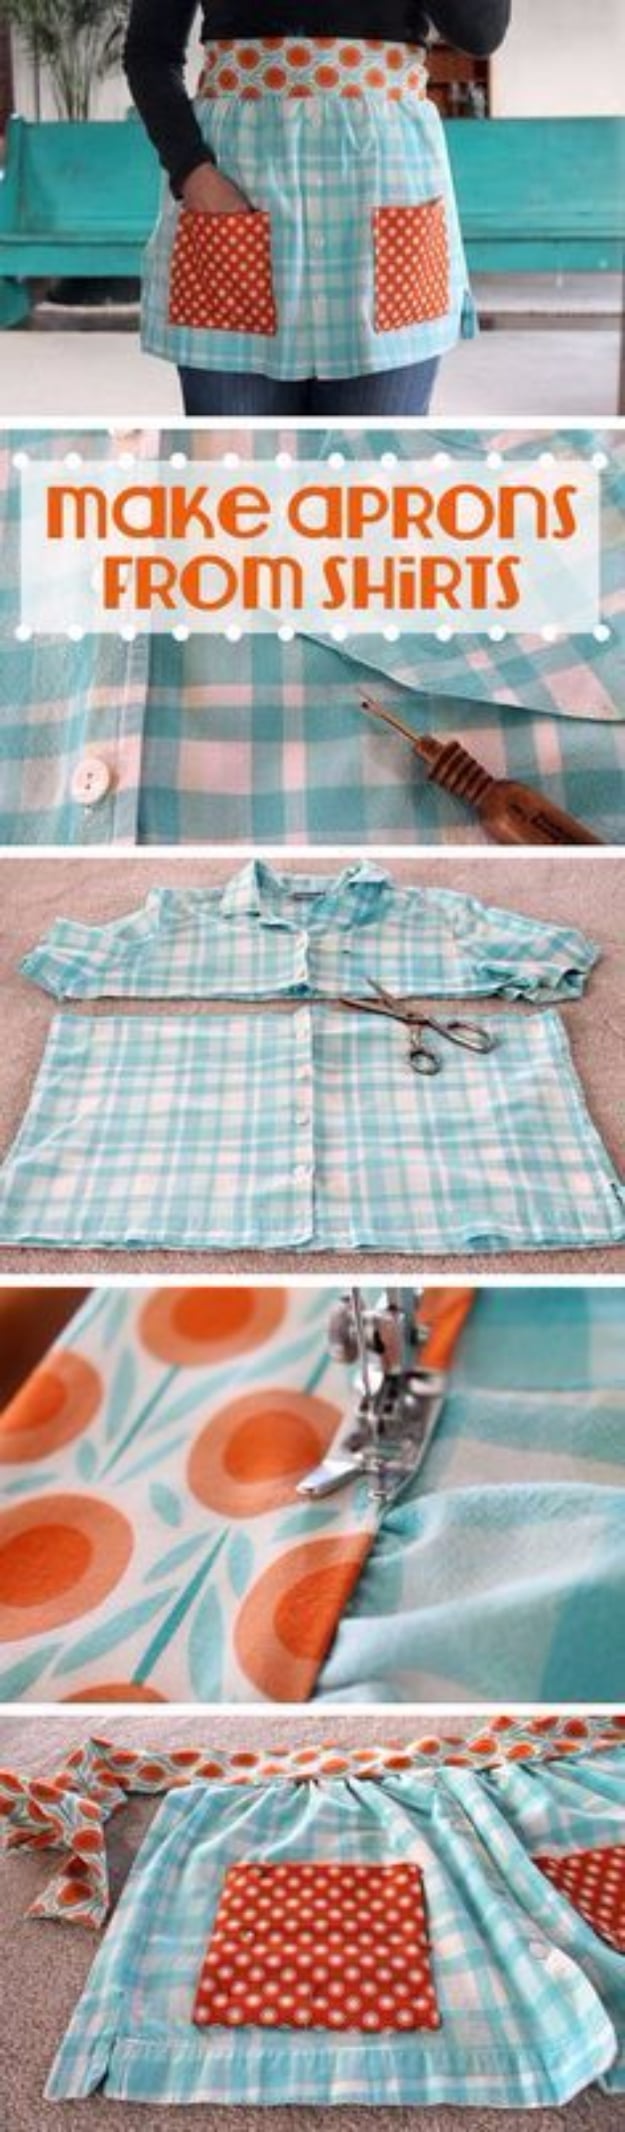 DIY Sewing Projects for the Kitchen - Aprons From Shirts - Easy Sewing Tutorials and Patterns for Towels, napkinds, aprons and cool Christmas gifts for friends and family - Rustic, Modern and Creative Home Decor Ideas #sewing 